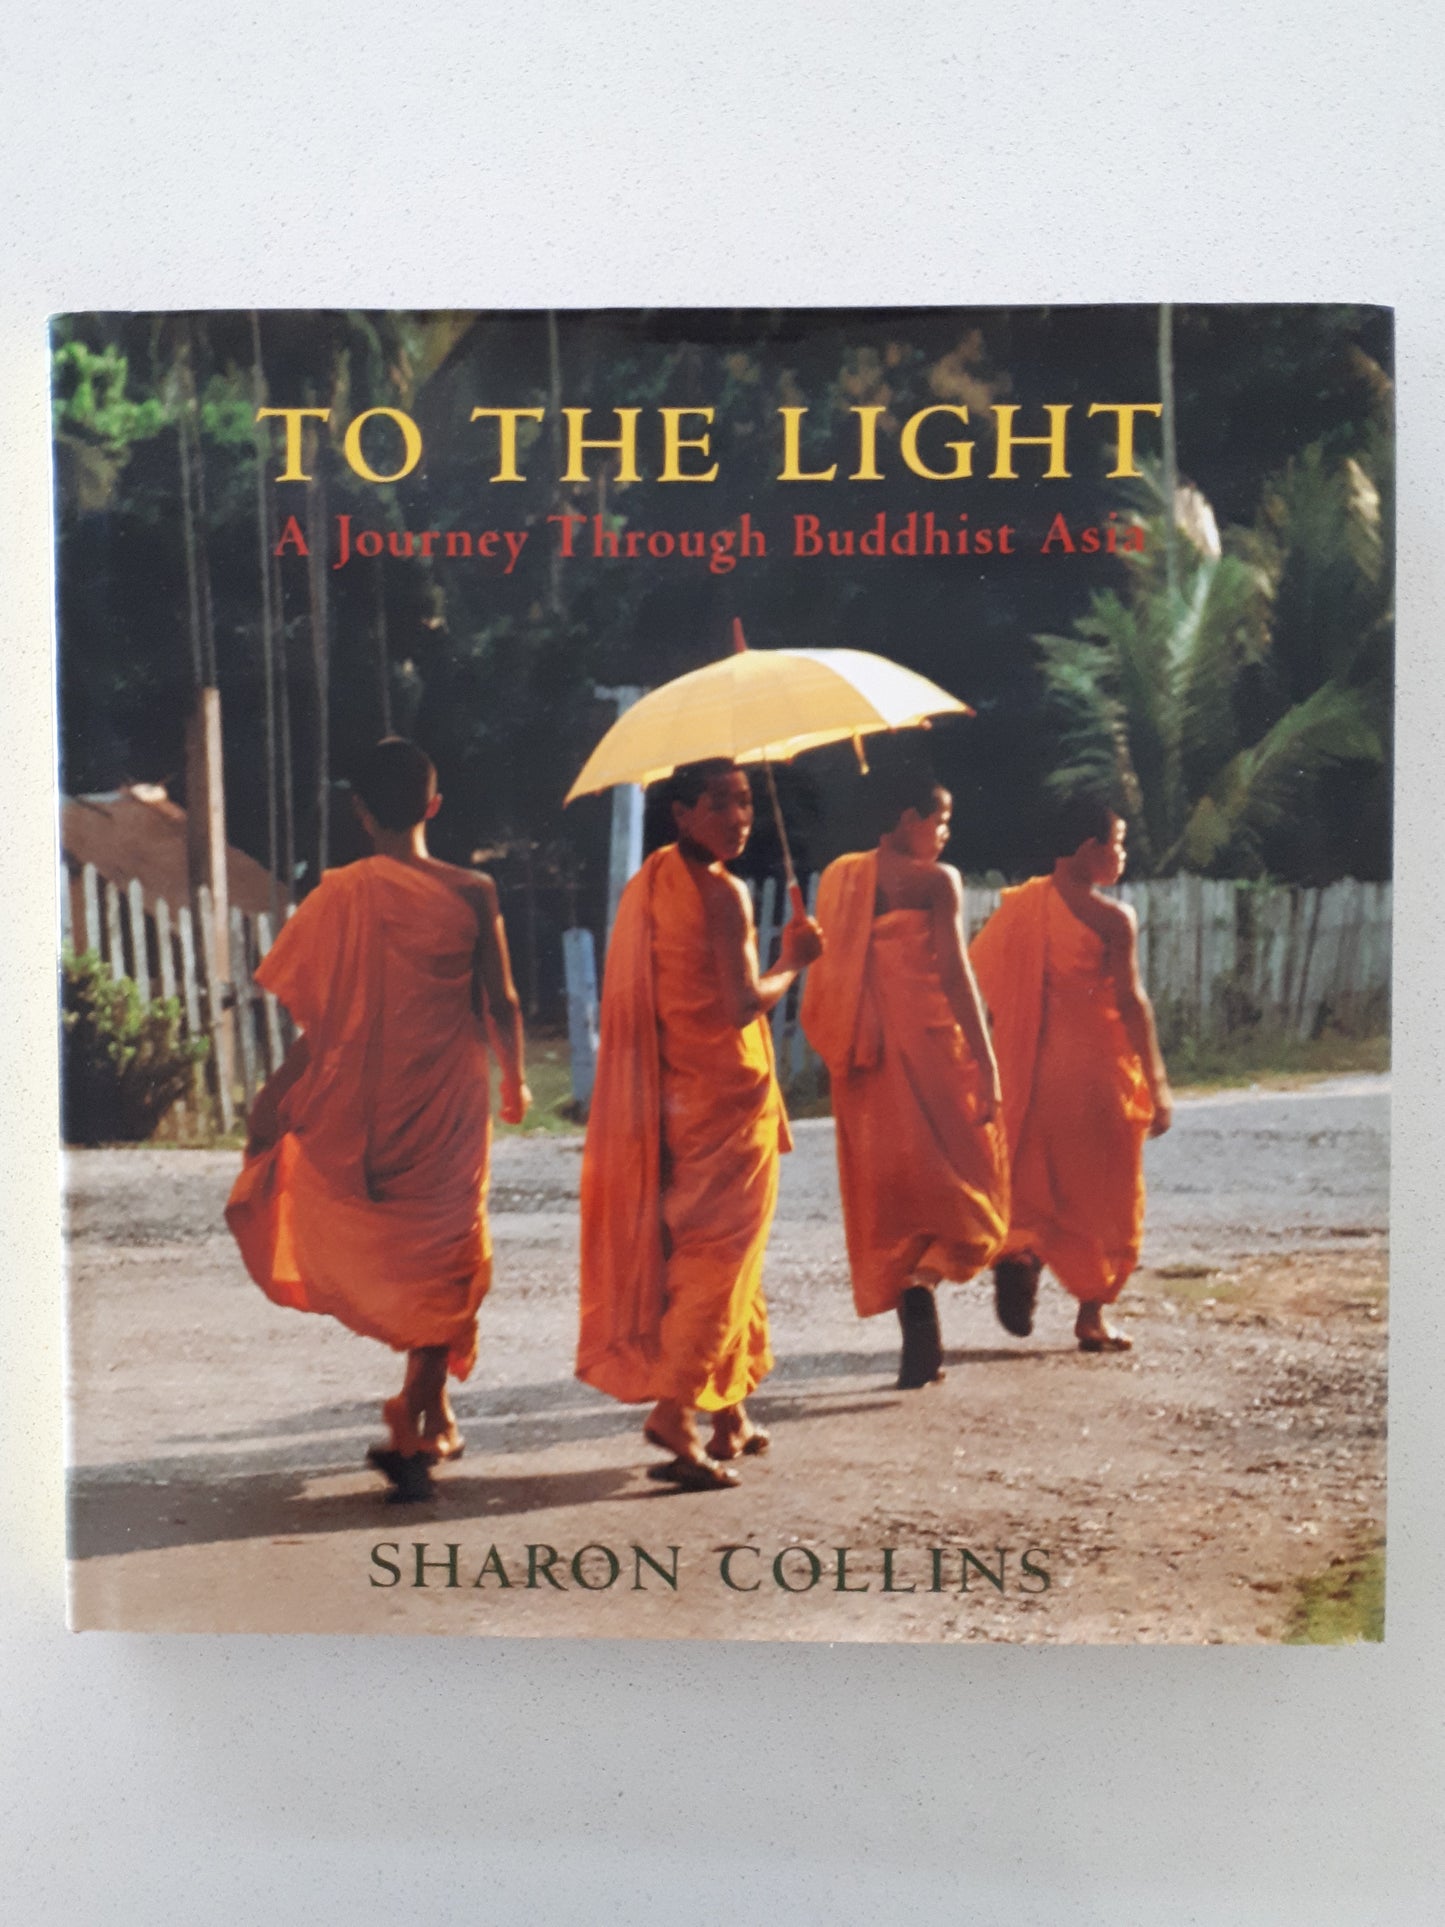 To The Light: A Journey Through Buddhist Asia by Sharon Collins